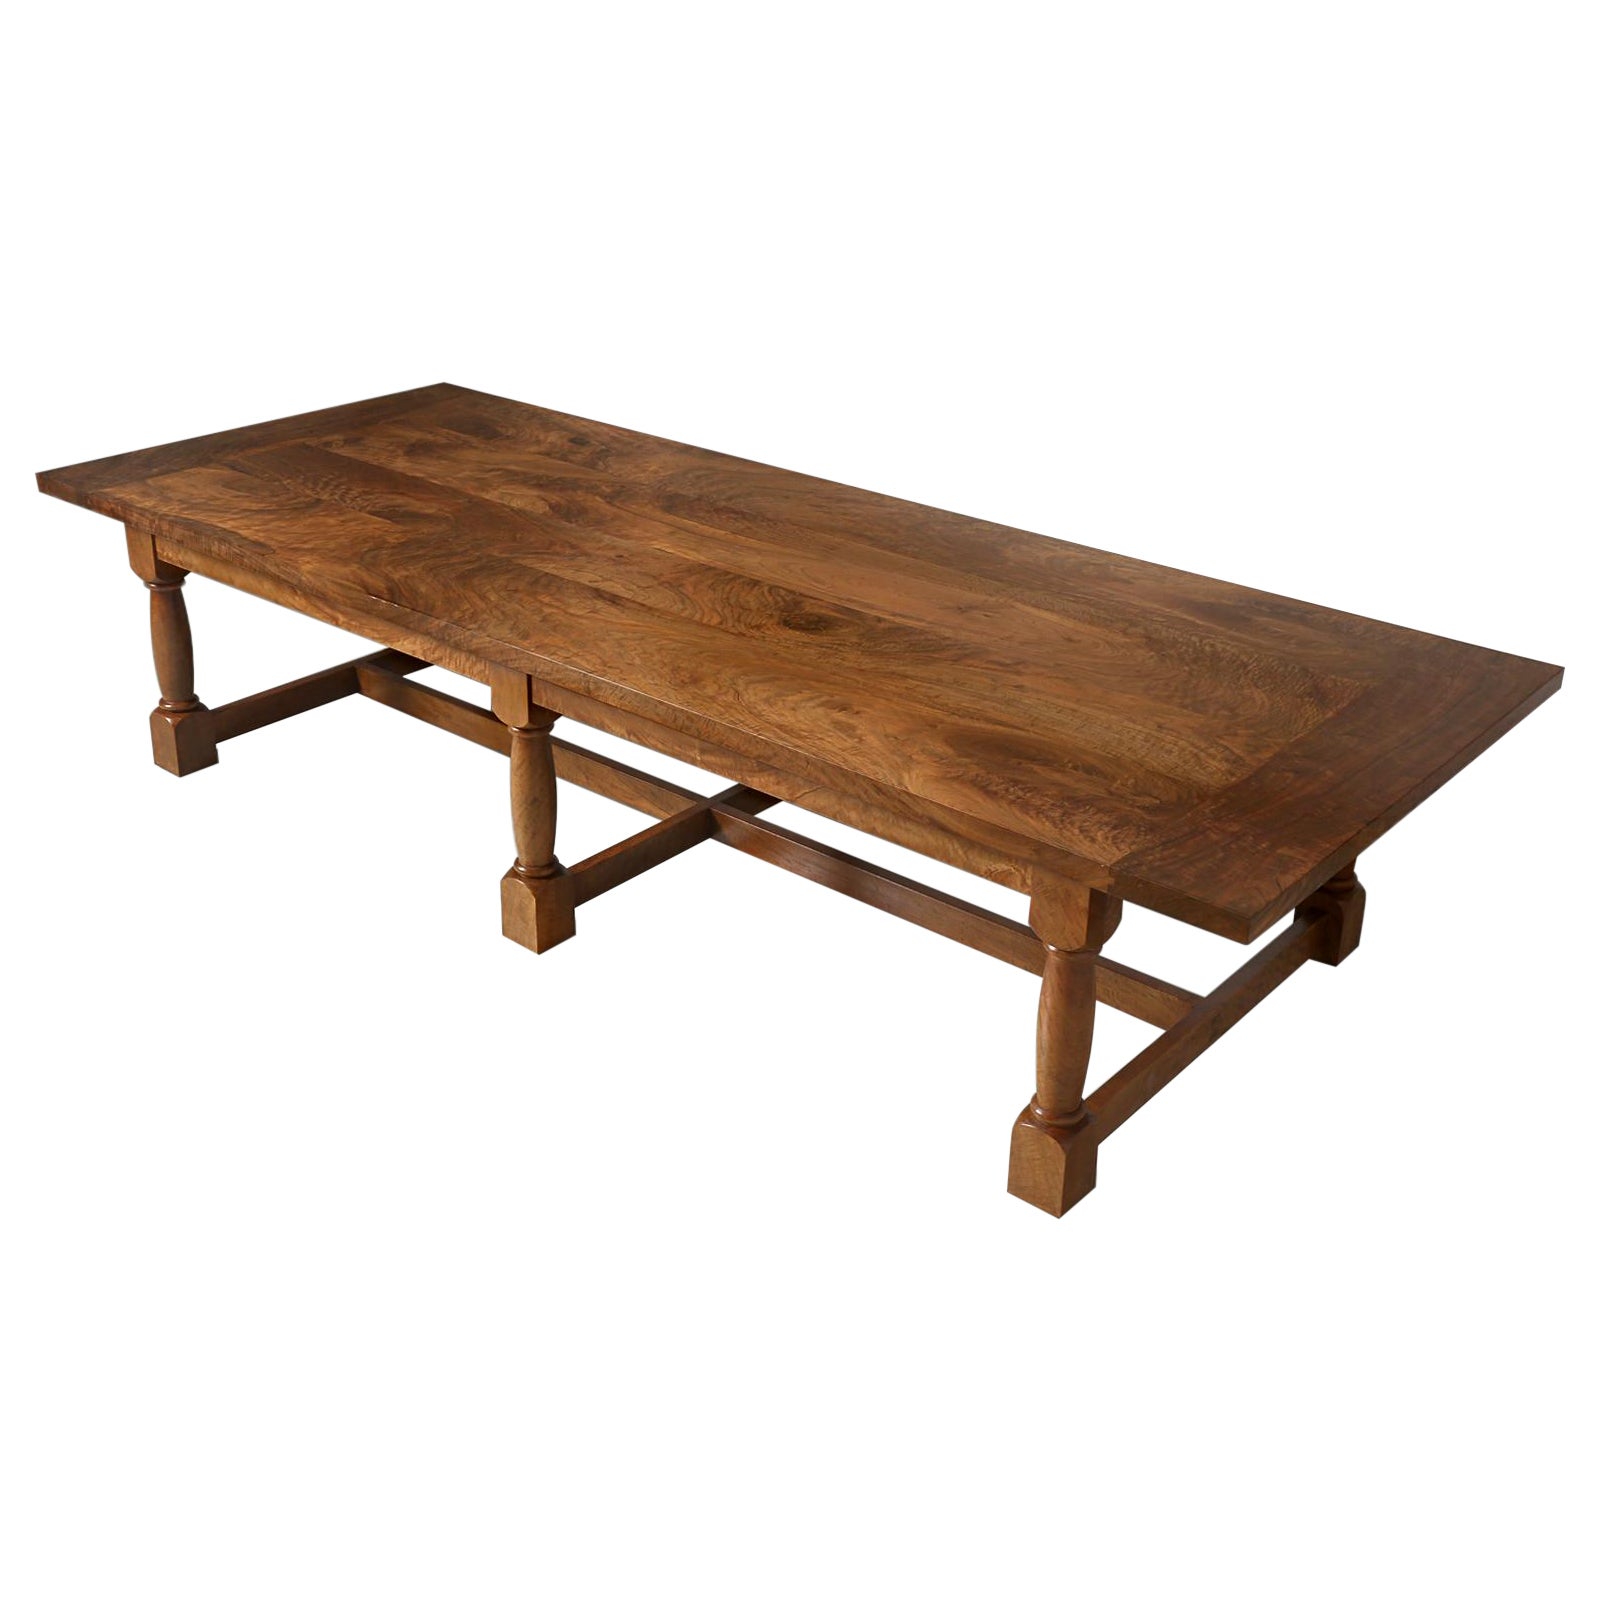 American Made Figured Walnut Desk Available Numerous Dimensions & Configurations For Sale